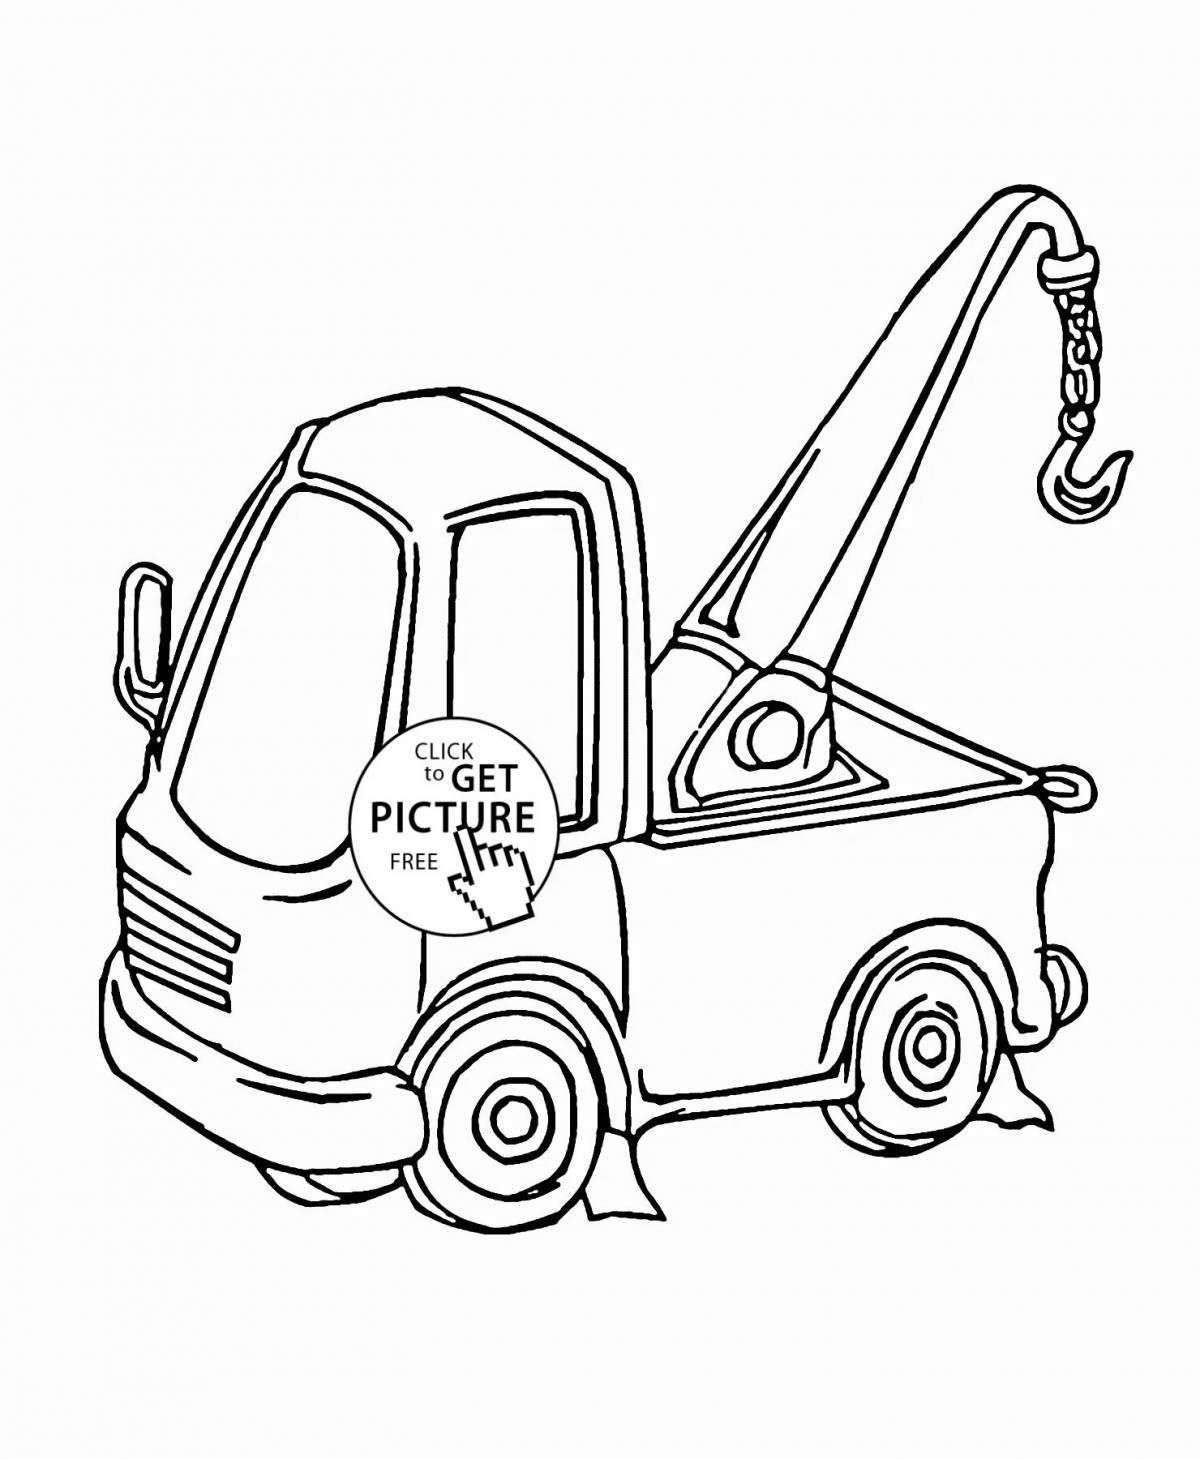 Coloring page shiny tow truck